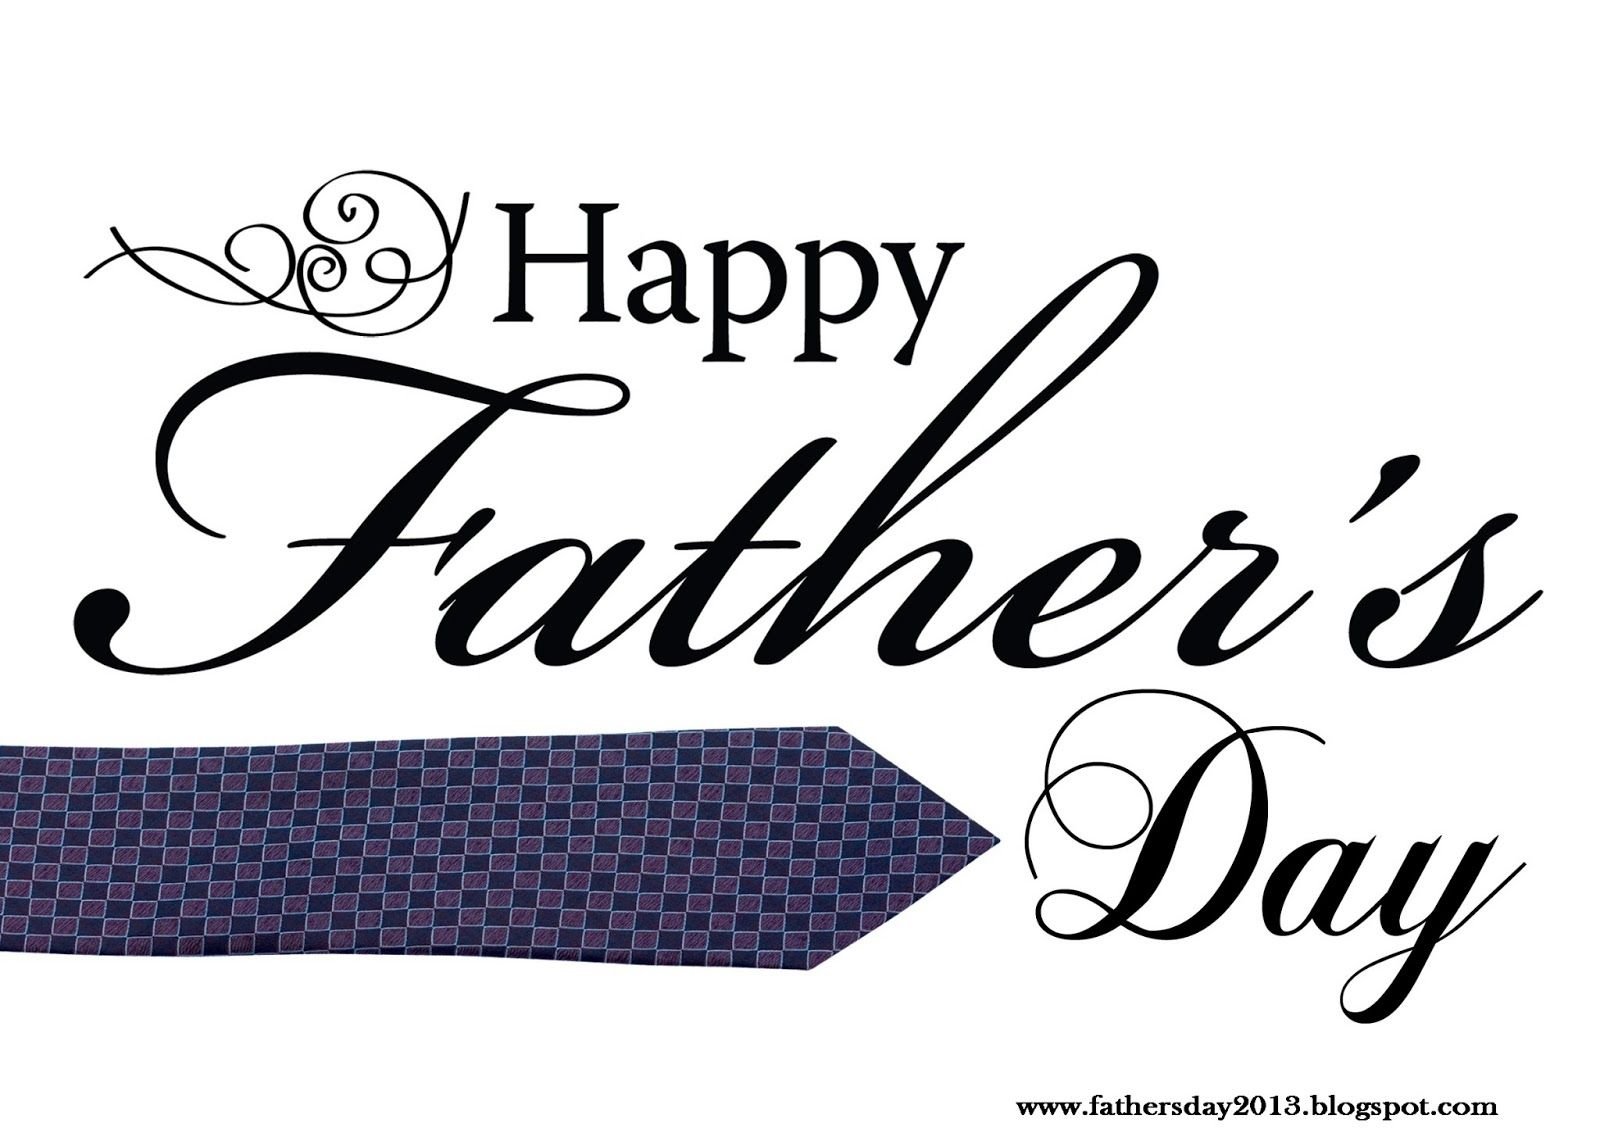 Fathers day HD wallpaper 2015. Desktop Wallpaper for Dad